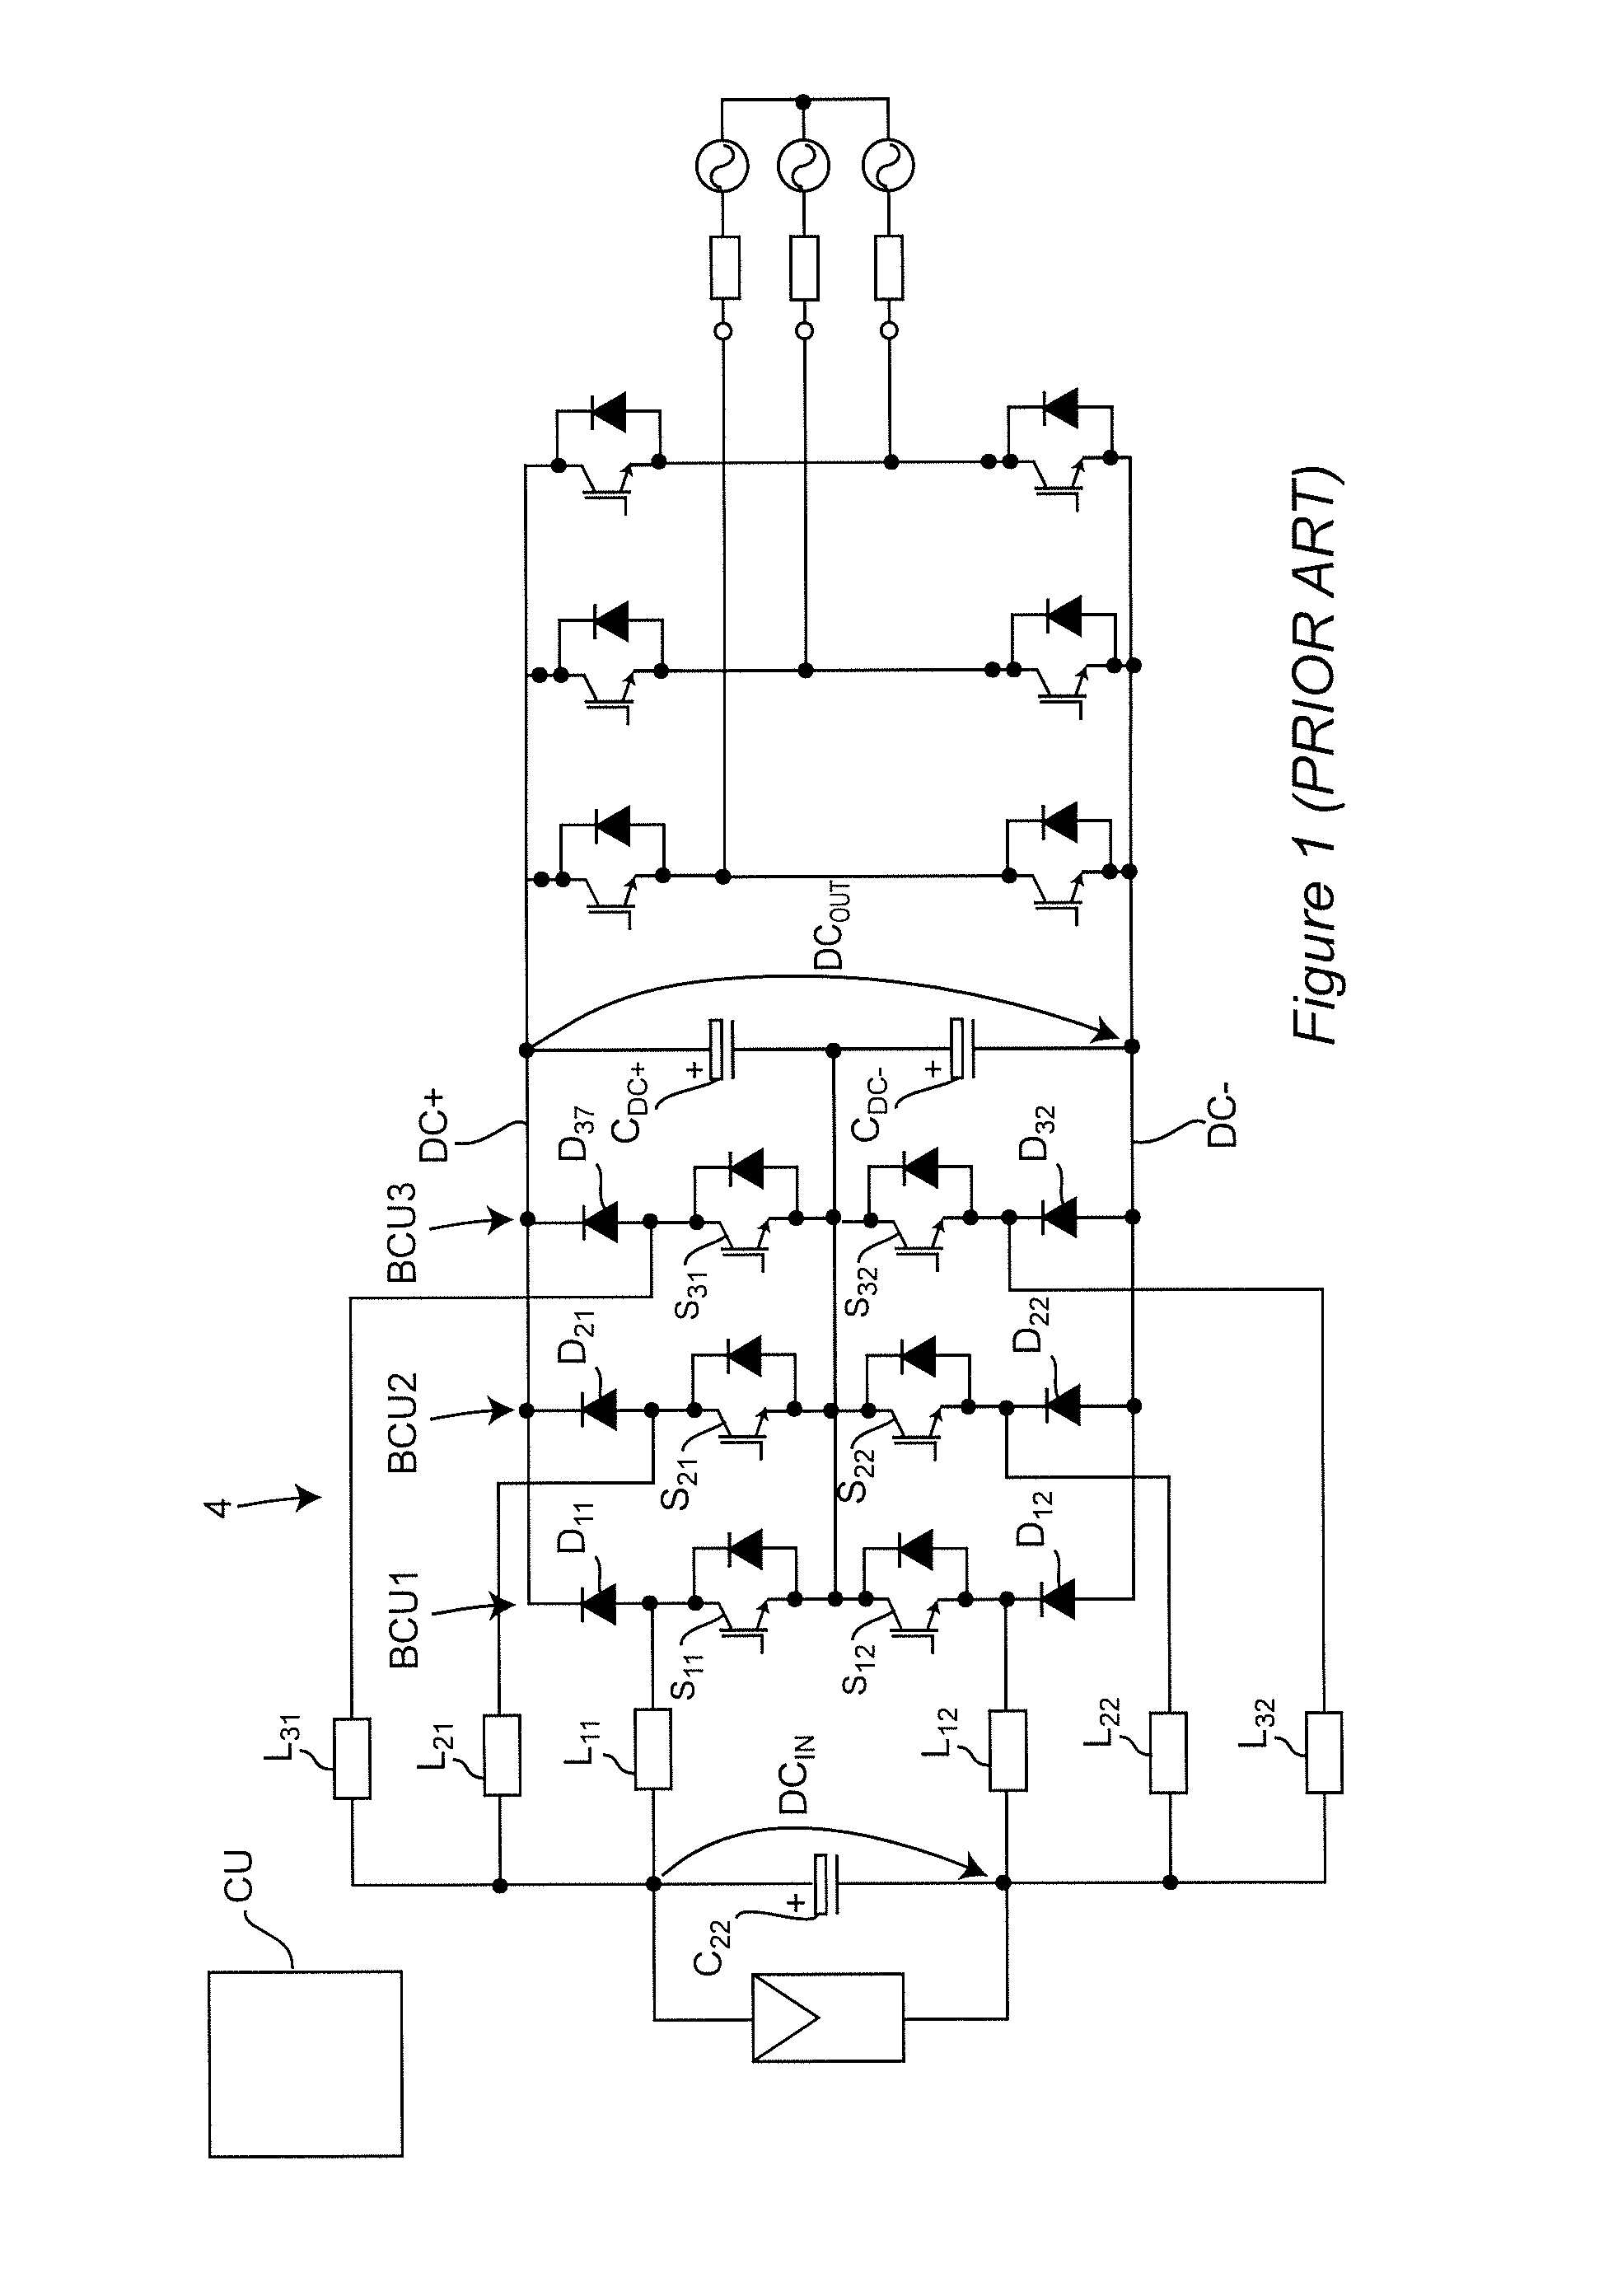 Coupled Inductor for Interleaved Multi-Phase Three-Level DC-DC Converters